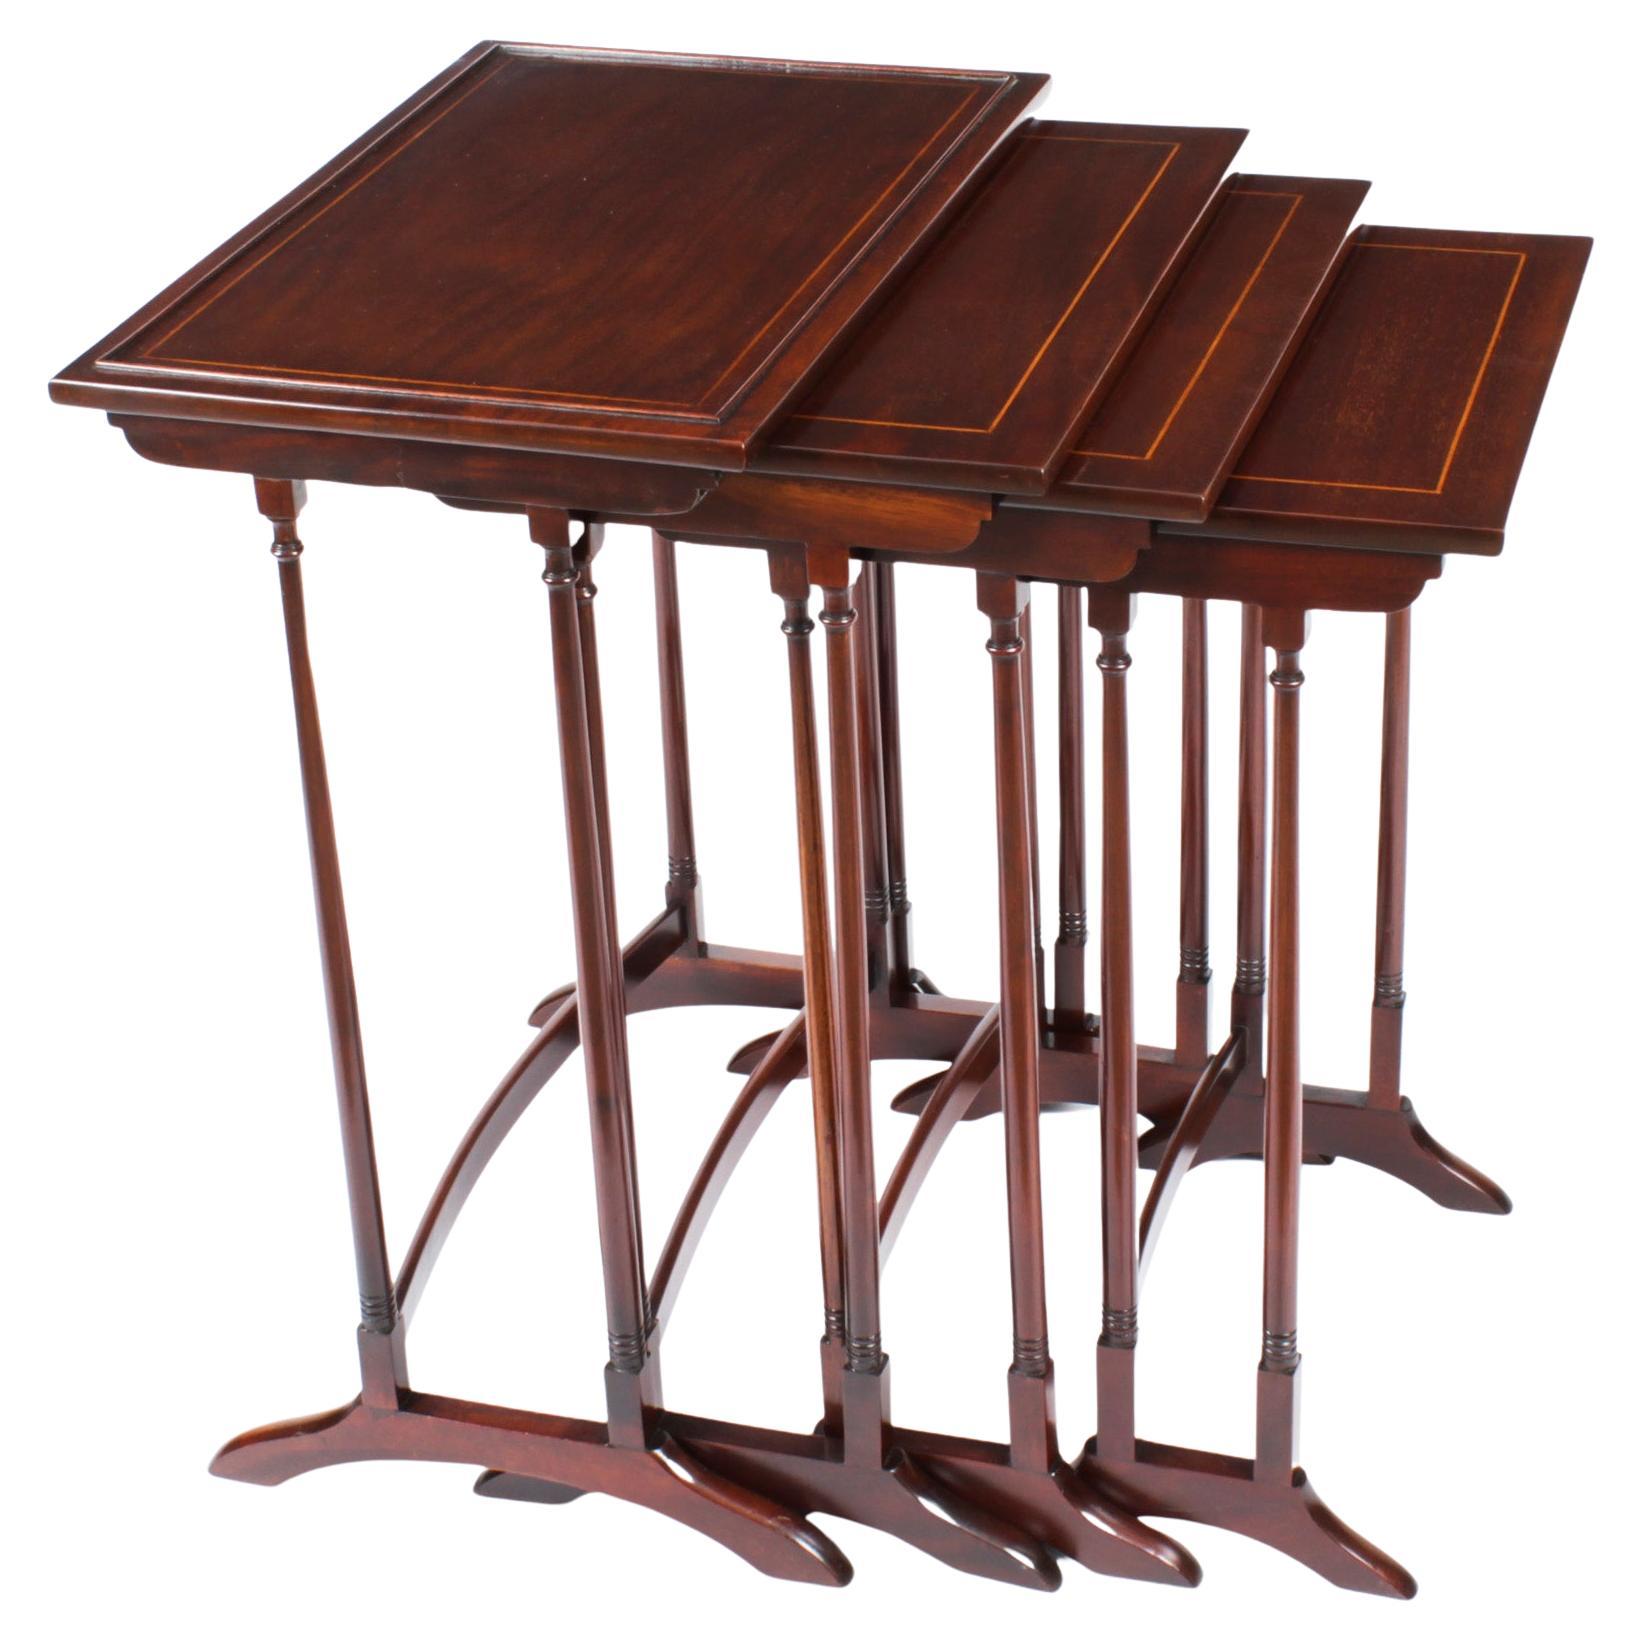 Antique Edwardian Mahogany Nest of Four Tables Early 20th Century For Sale